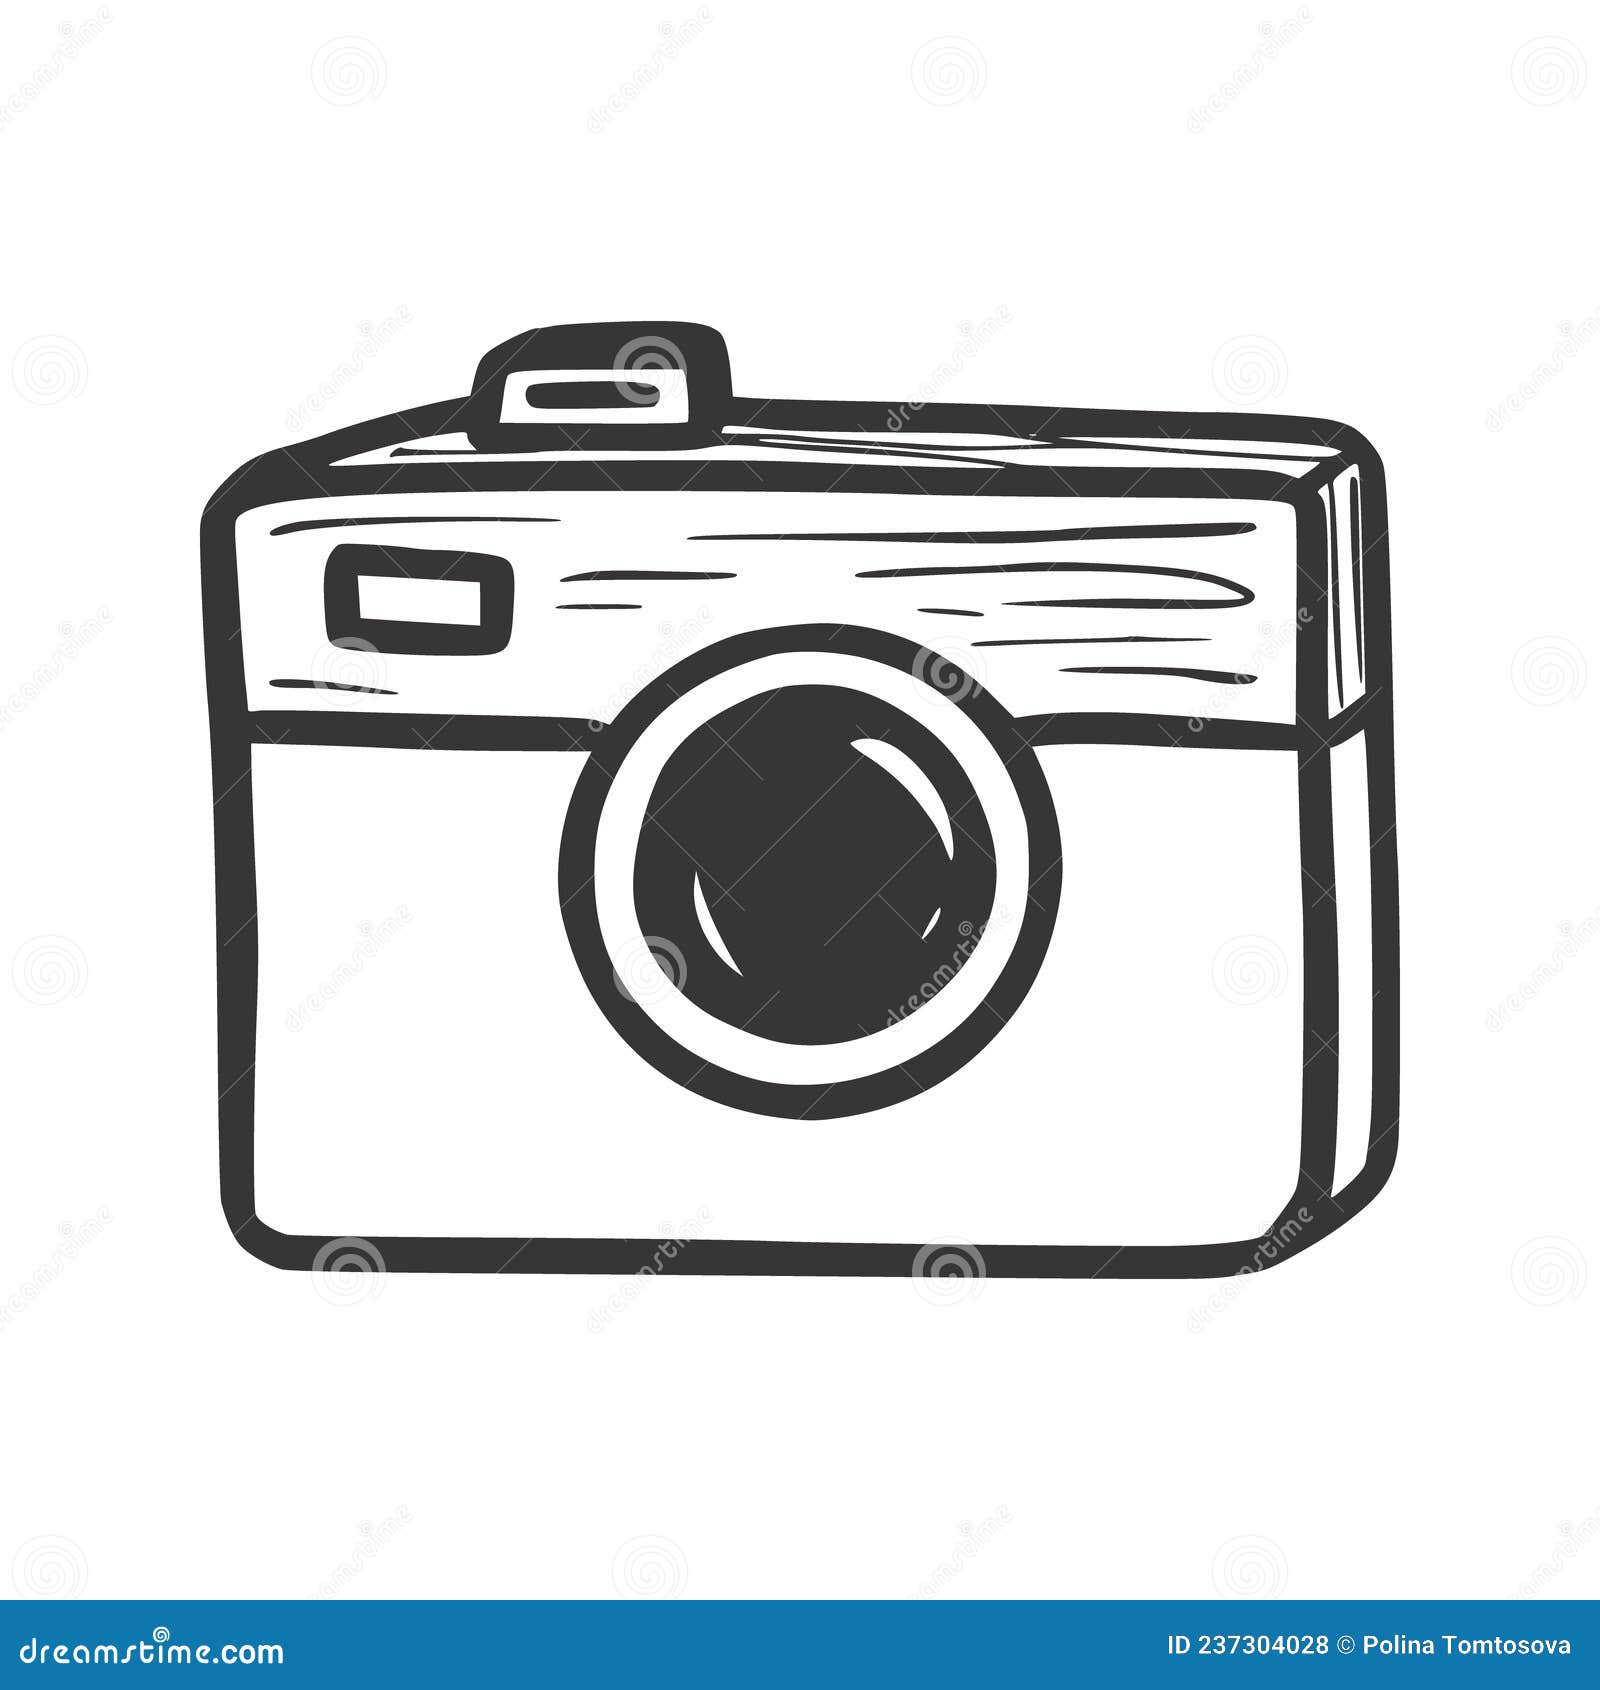 One Line Drawing Vector PNG Images, Camera In One Line Art Drawing, Wing  Drawing, Camera Drawing, Camera Sketch PNG Image For Free Download